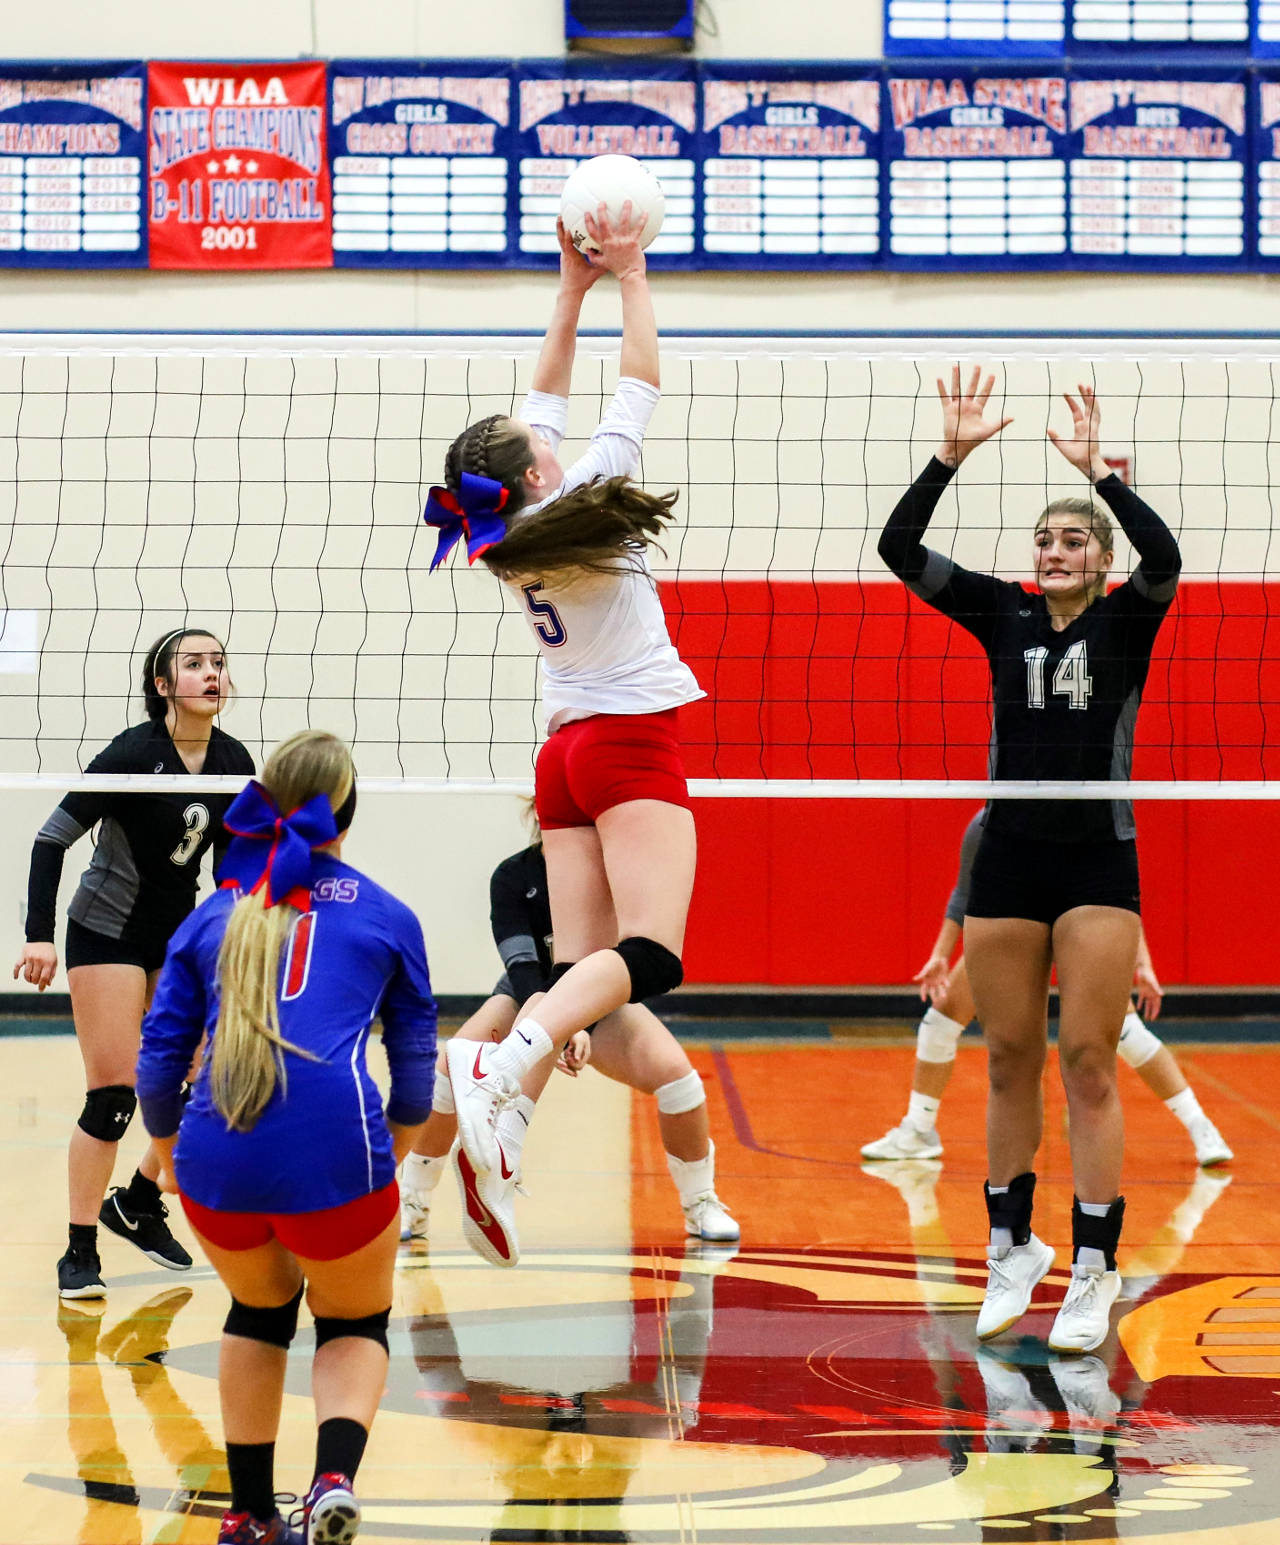 Willapa Valley’s Olivia Betrozoff (5) attempts a drop shot during the Vikings’ straight-set loss to Wahkiakum in a 2B District IV quarterfinal on Saturday in Menlo. (Photo by Larry Bale)